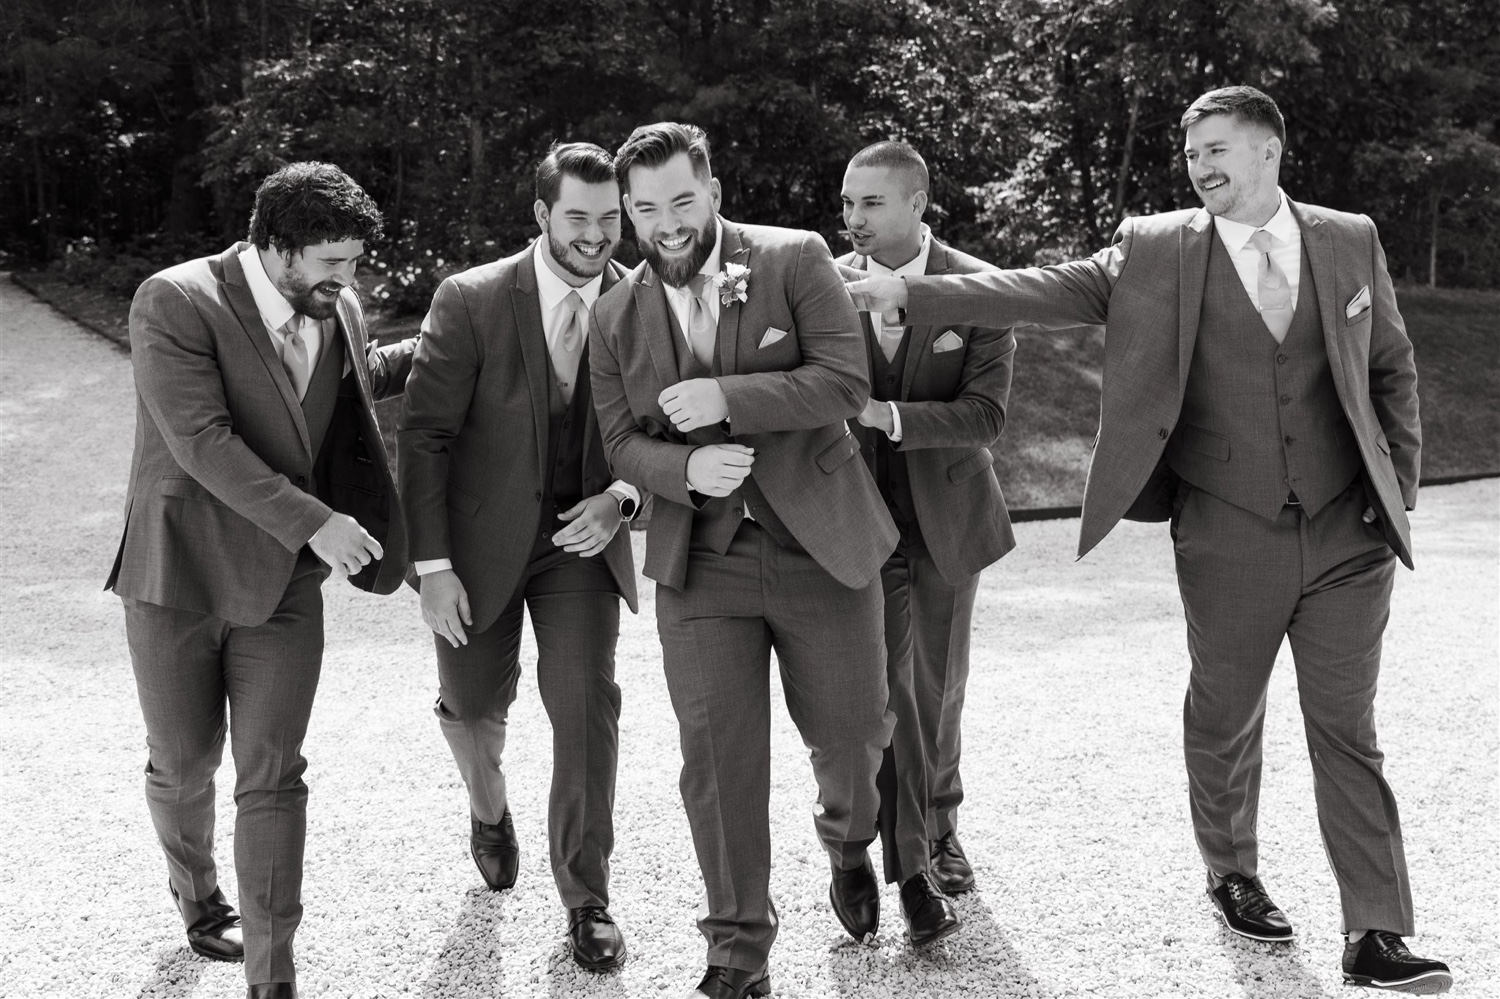 ivy rose barn groom and groomsmen smiling laughing black and white